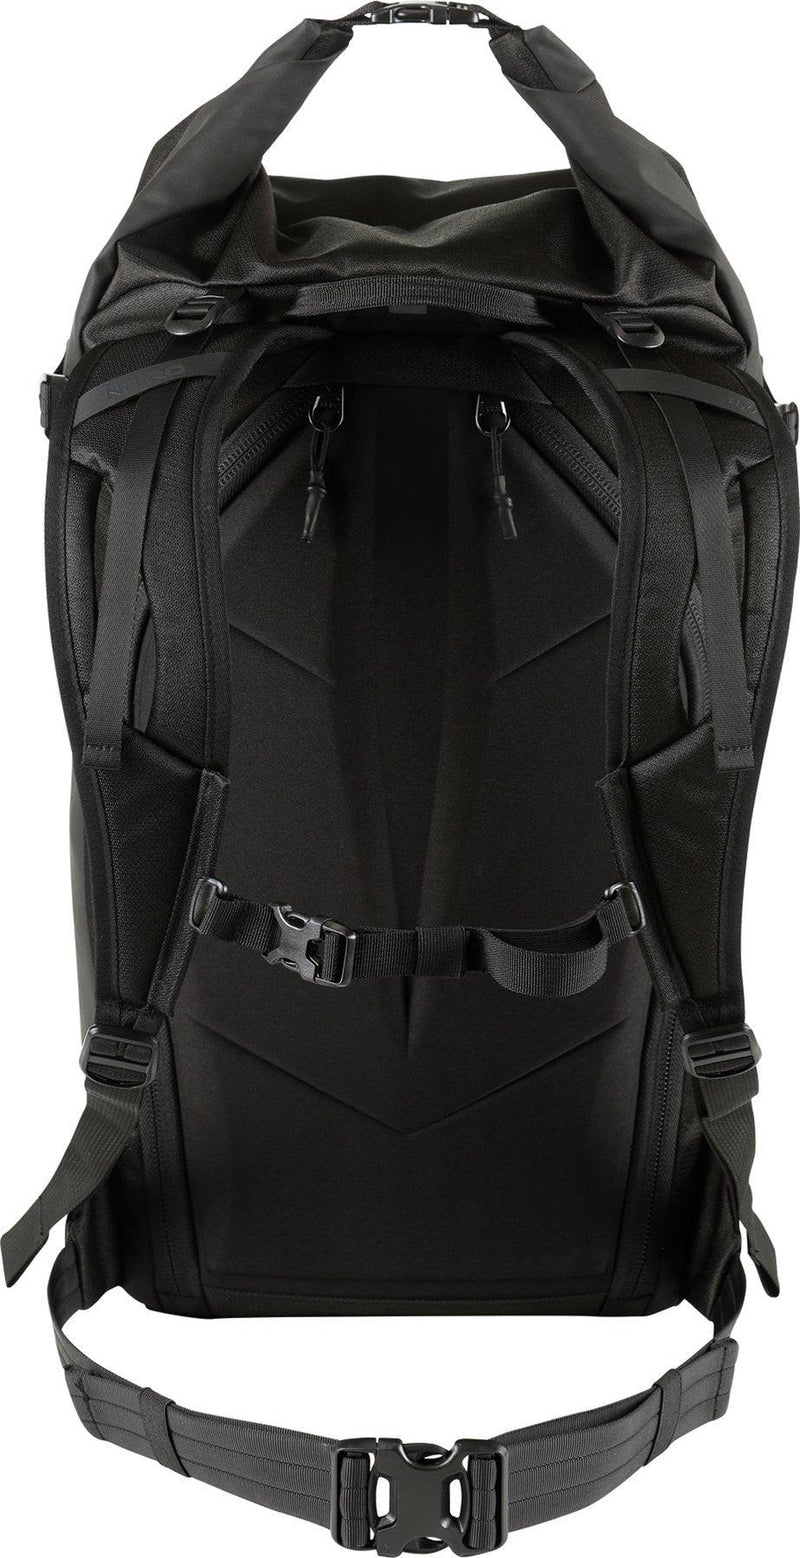 Load image into Gallery viewer, Nitro Splitpack 30 Backpack - Gear West
